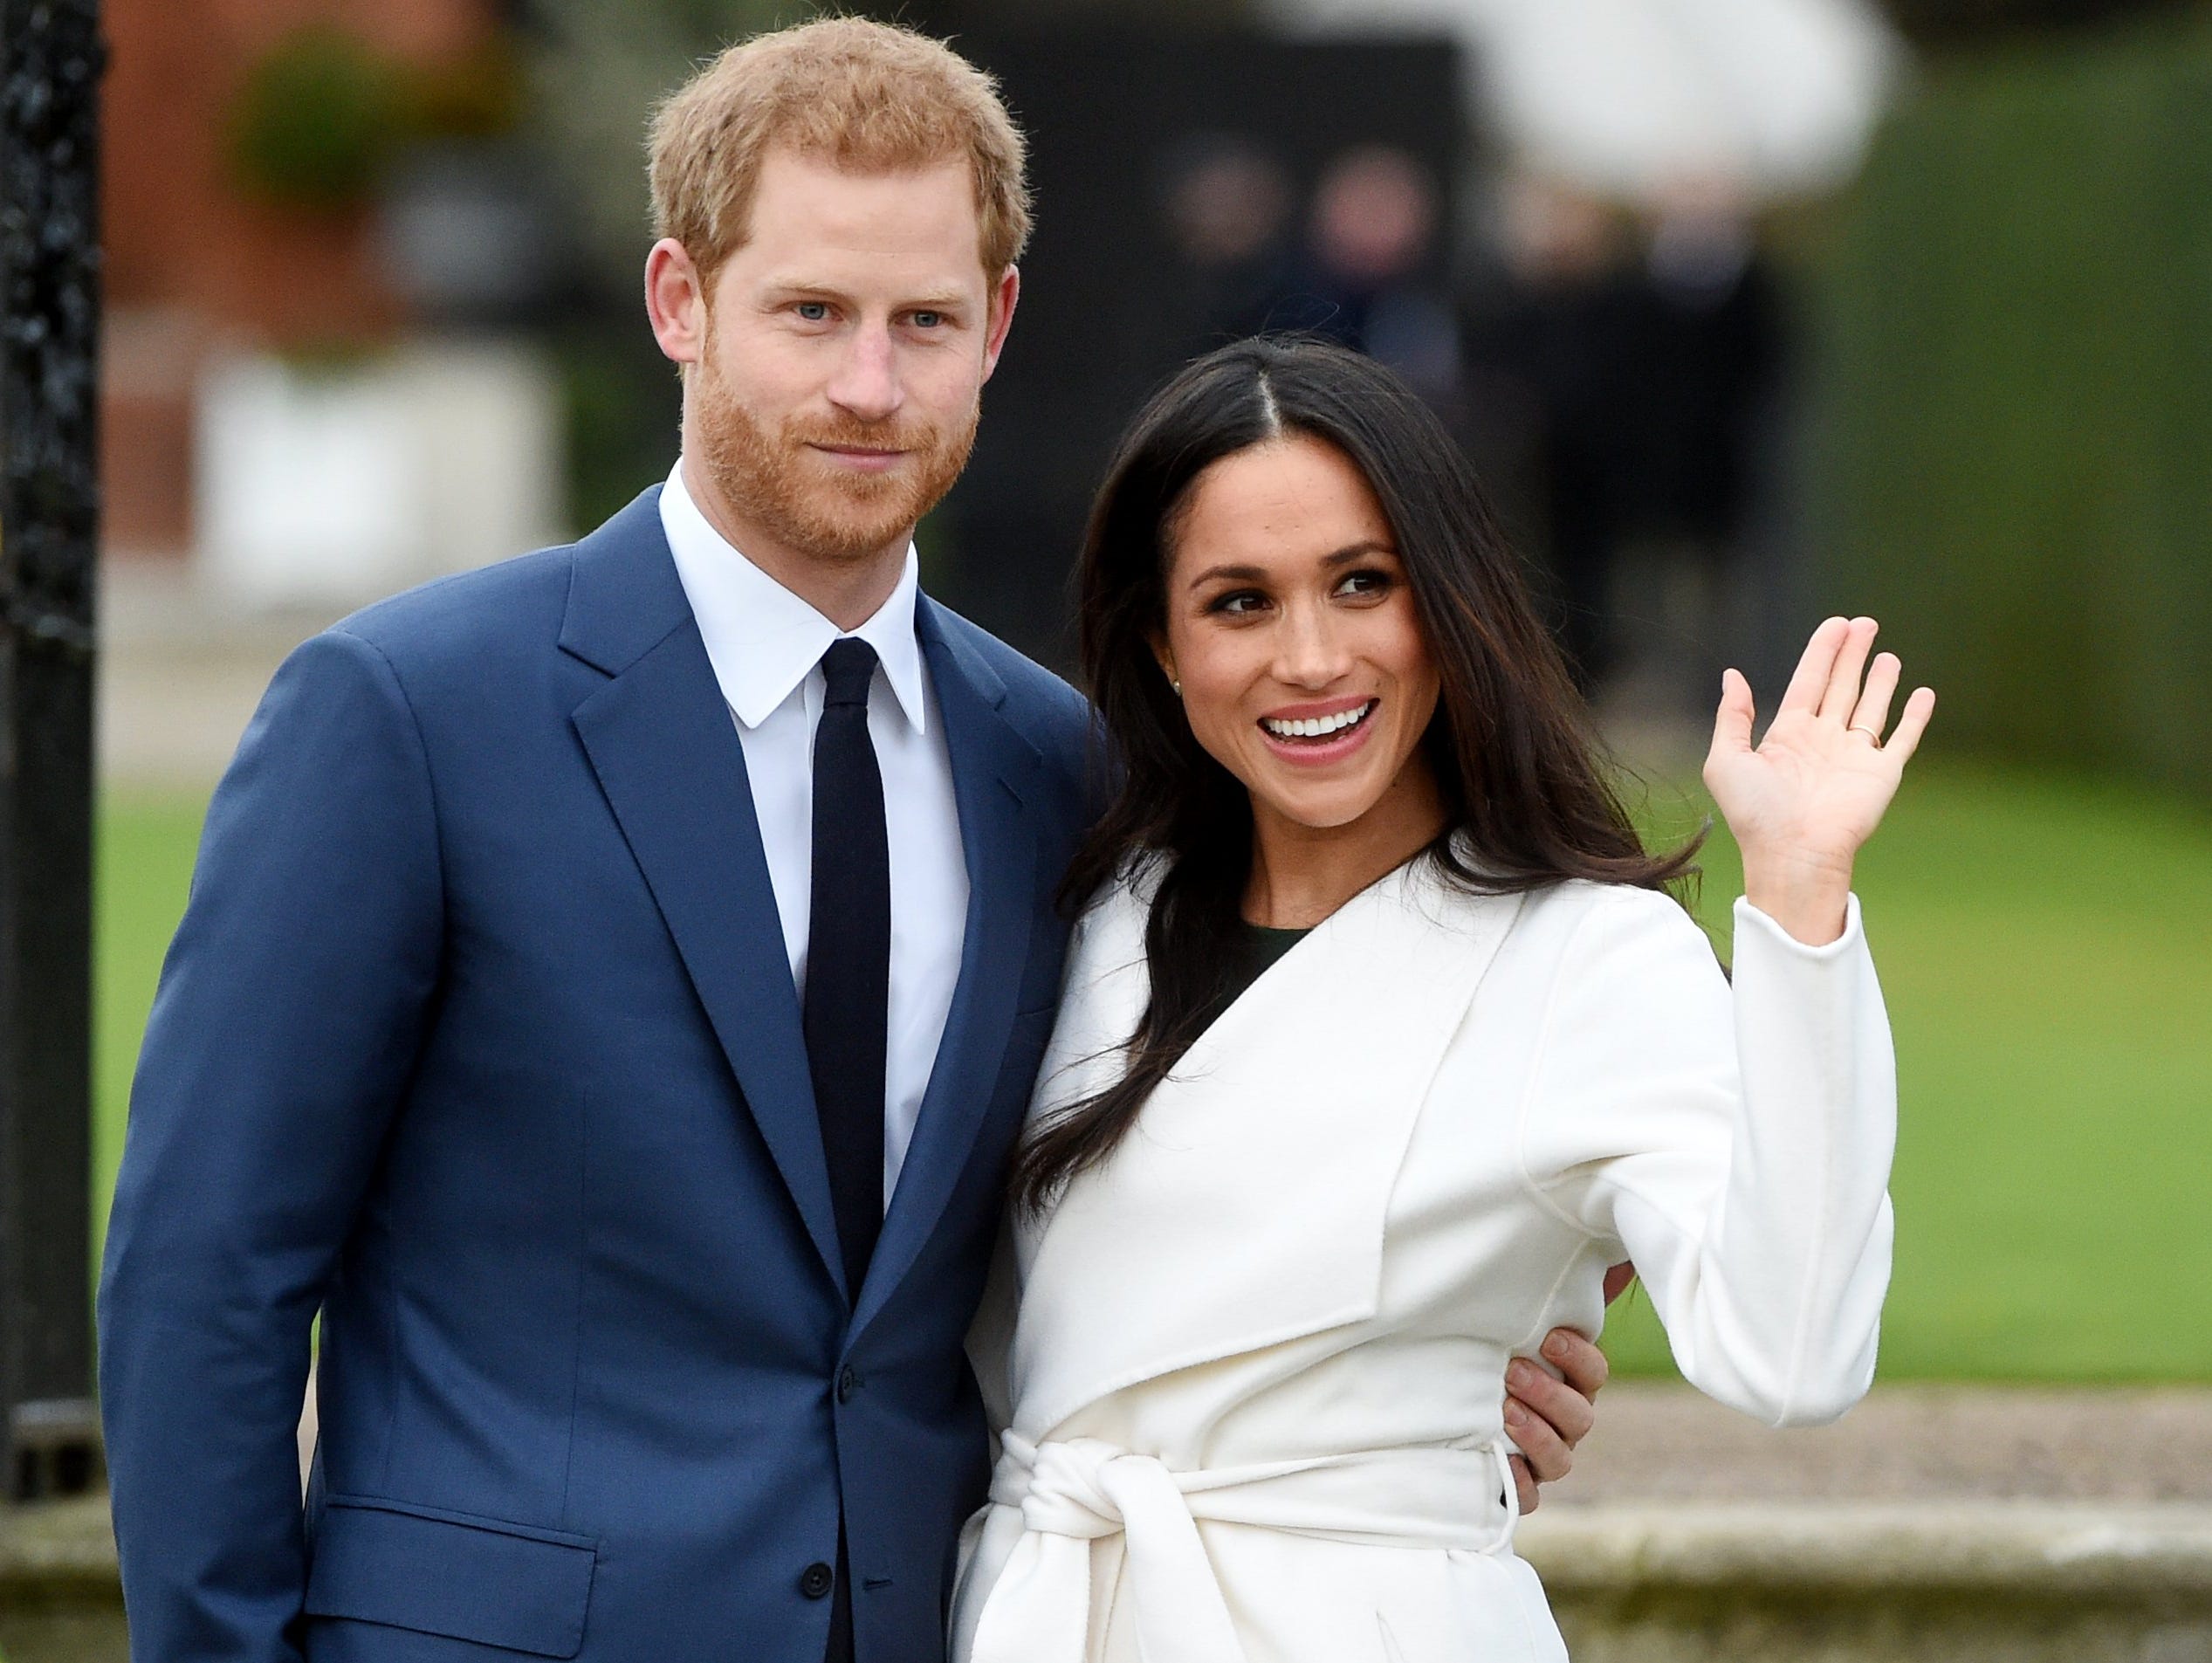 Britain's Prince Harry pose with Meghan Markle during a photocall after announcing their engagement in the Sunken Garden in Kensington Palace in London.